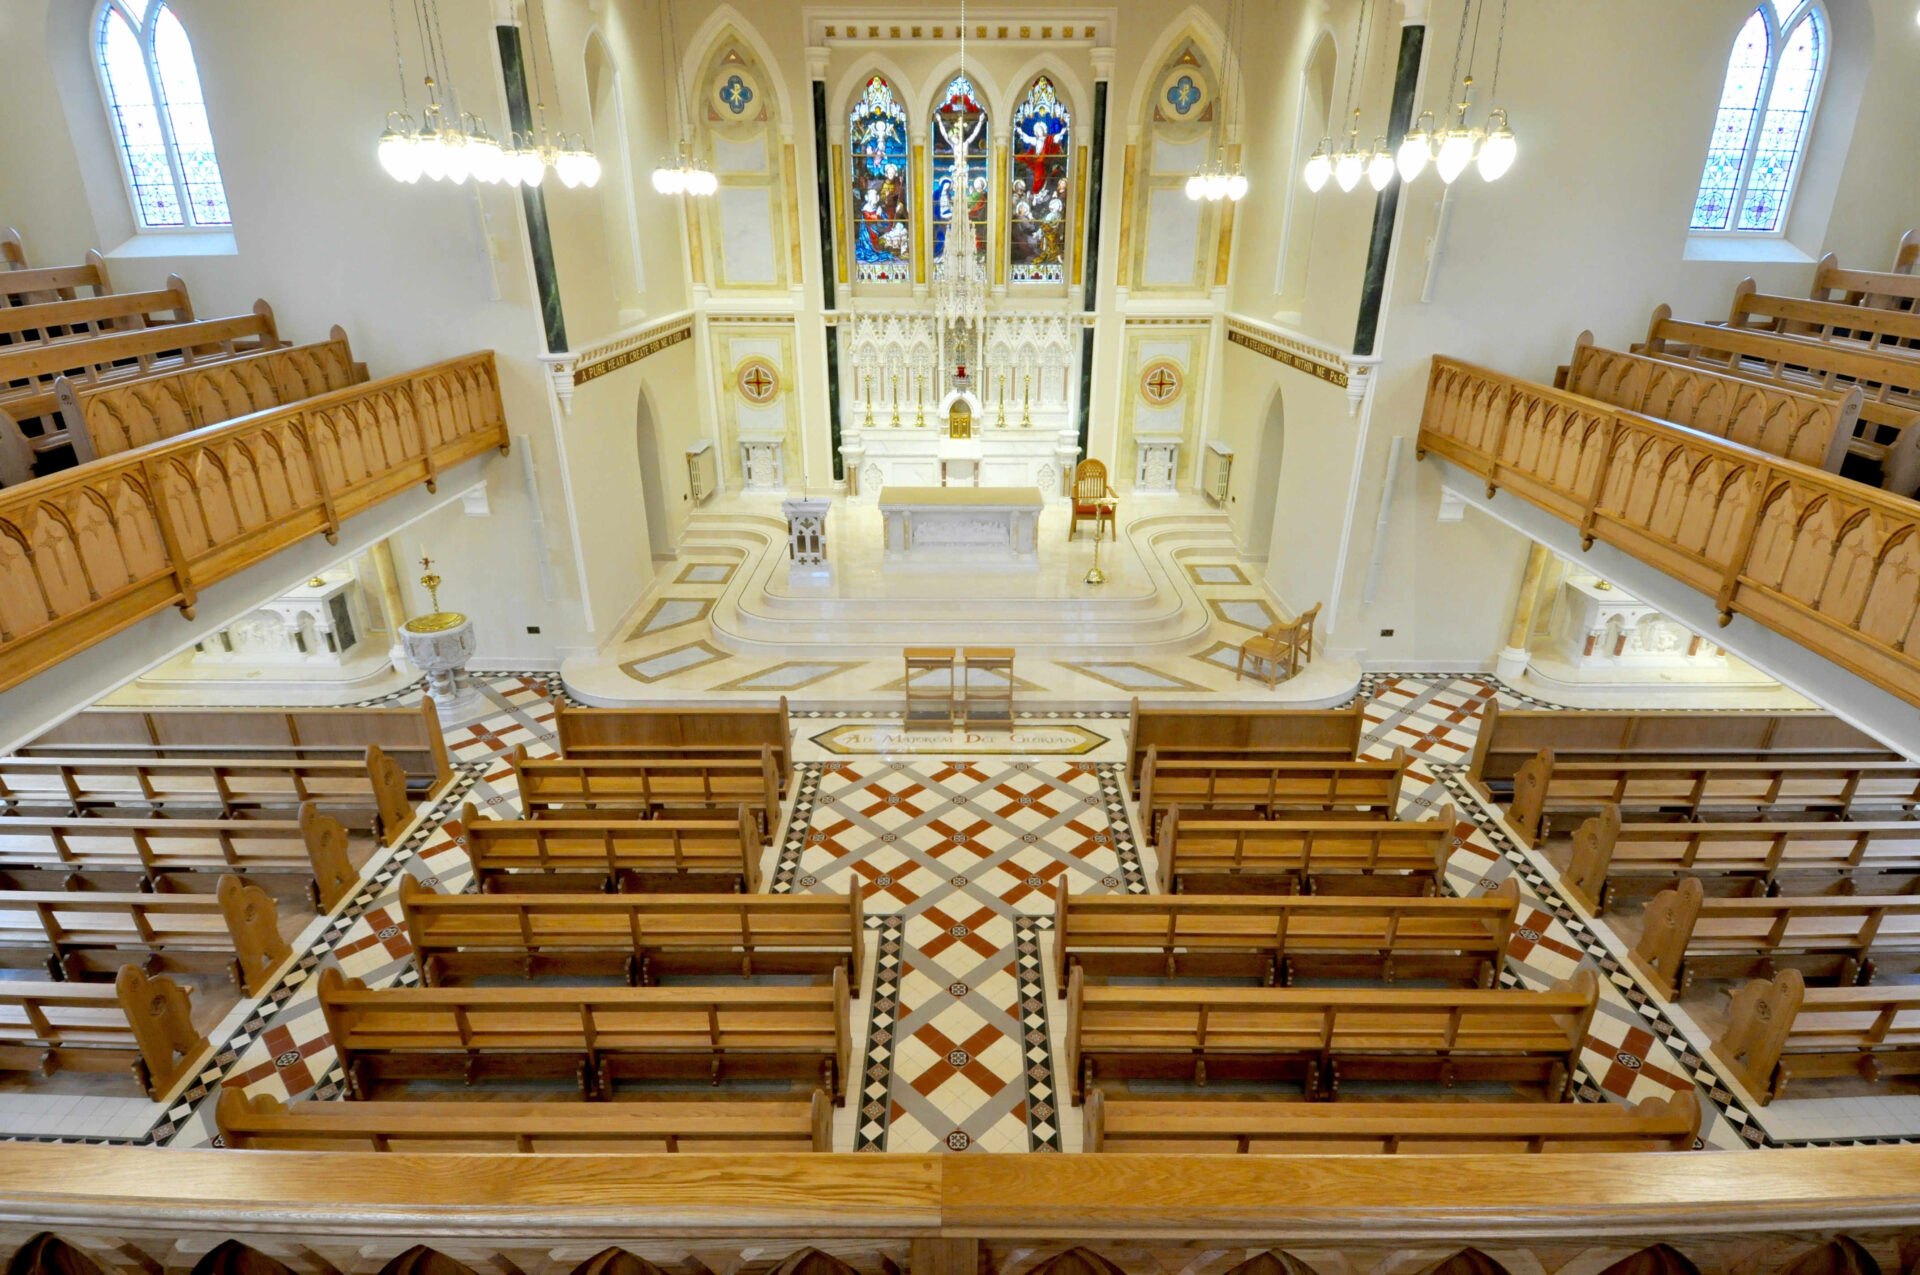 St Patrick’s Church, Donaghmore